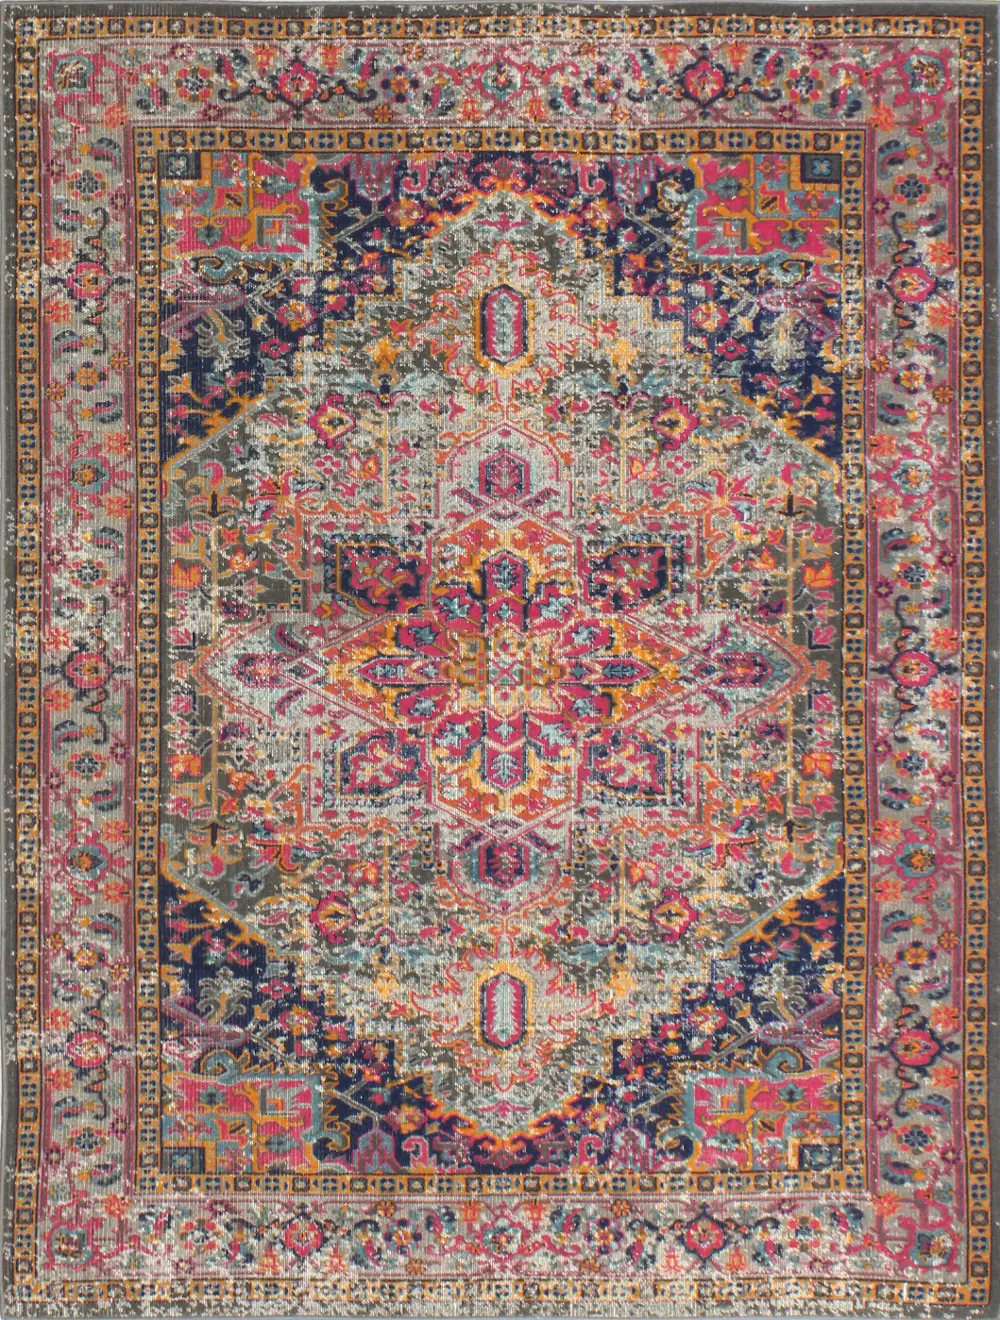 H114-GY-4X6-Z034 4 x 6 Small Traditional Blake Fuschia Pink and Blue Rug - Heritage-1